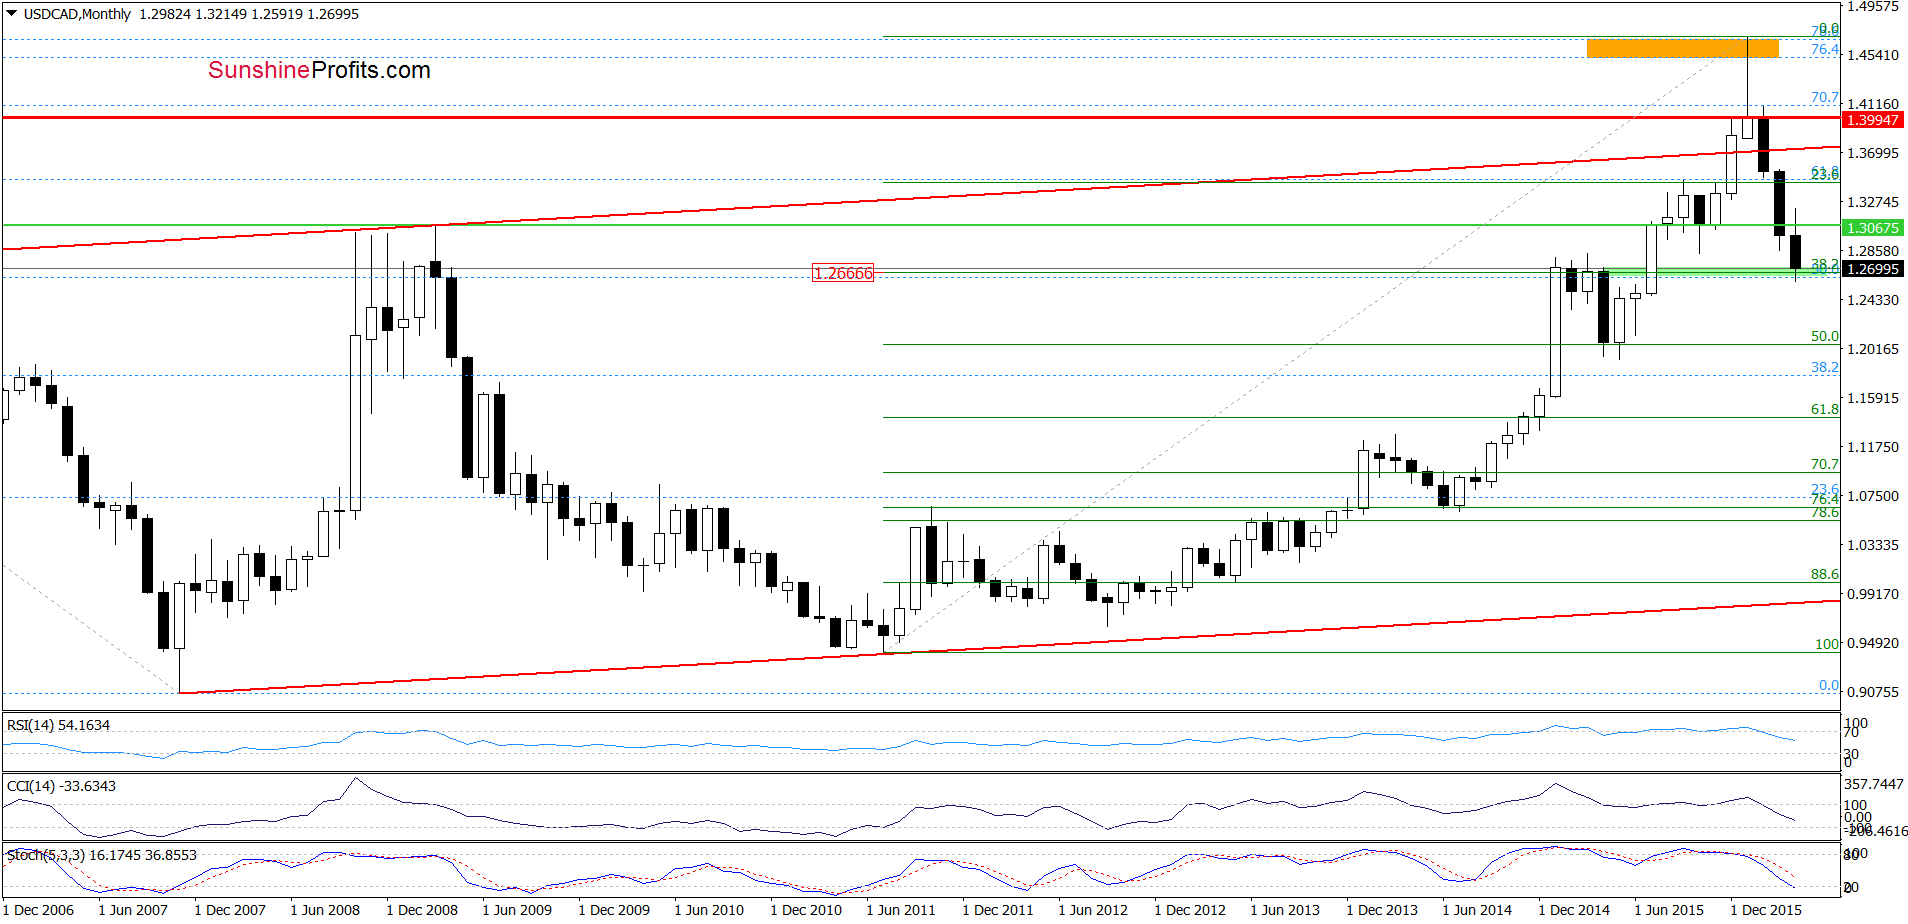 USD/CAD monthly chart